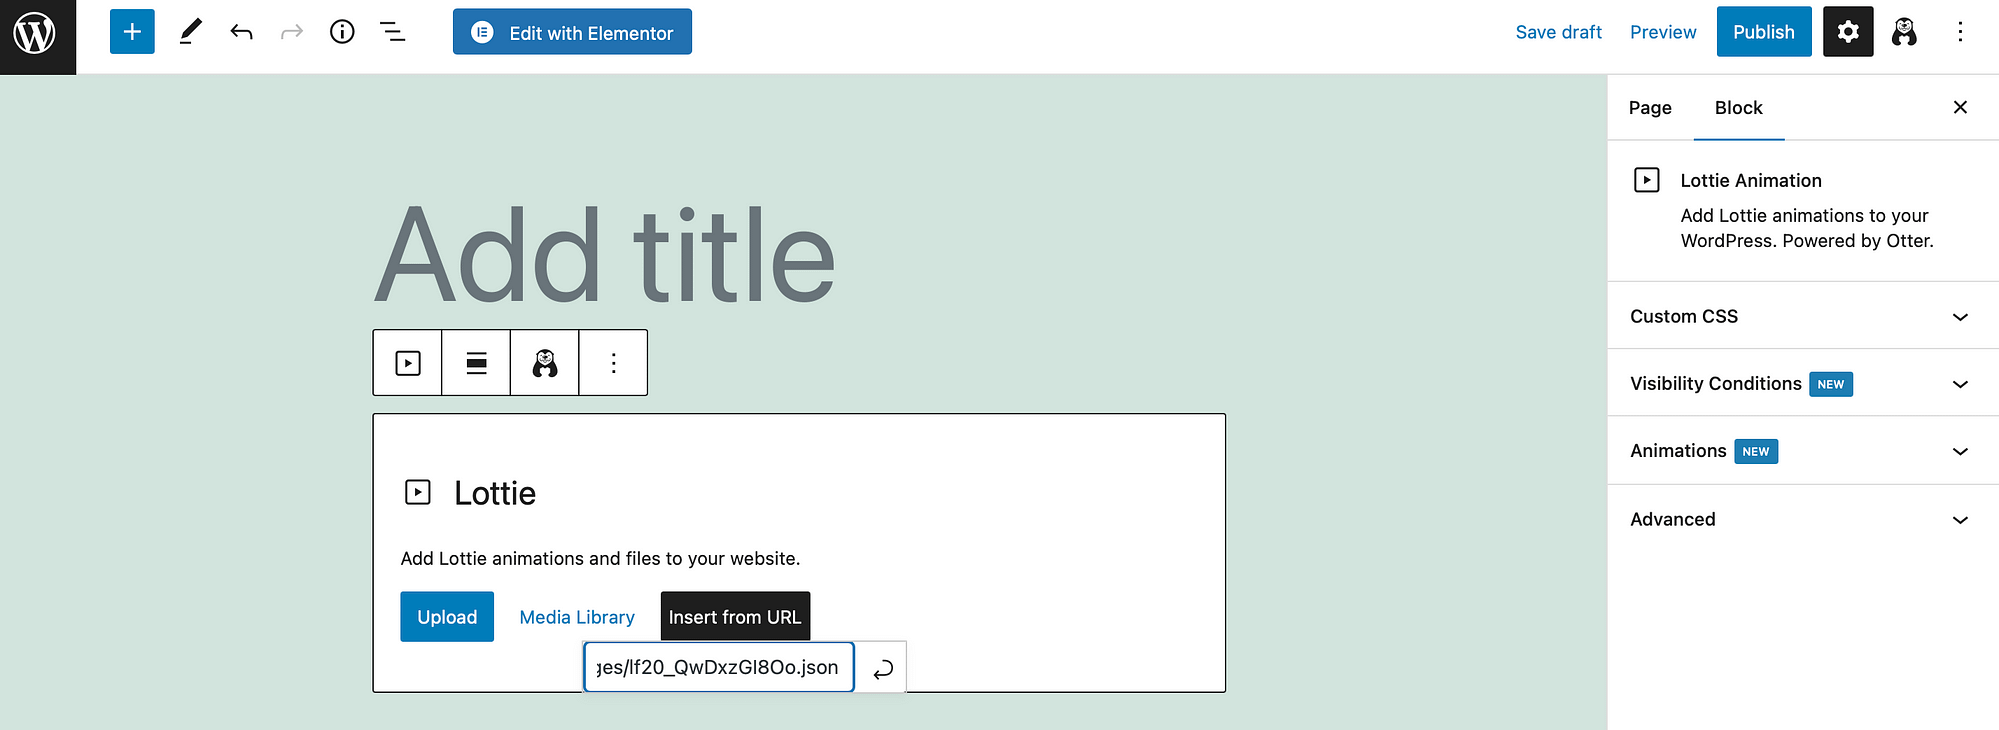 Inserting Lottie Animations URL in to Otter Block